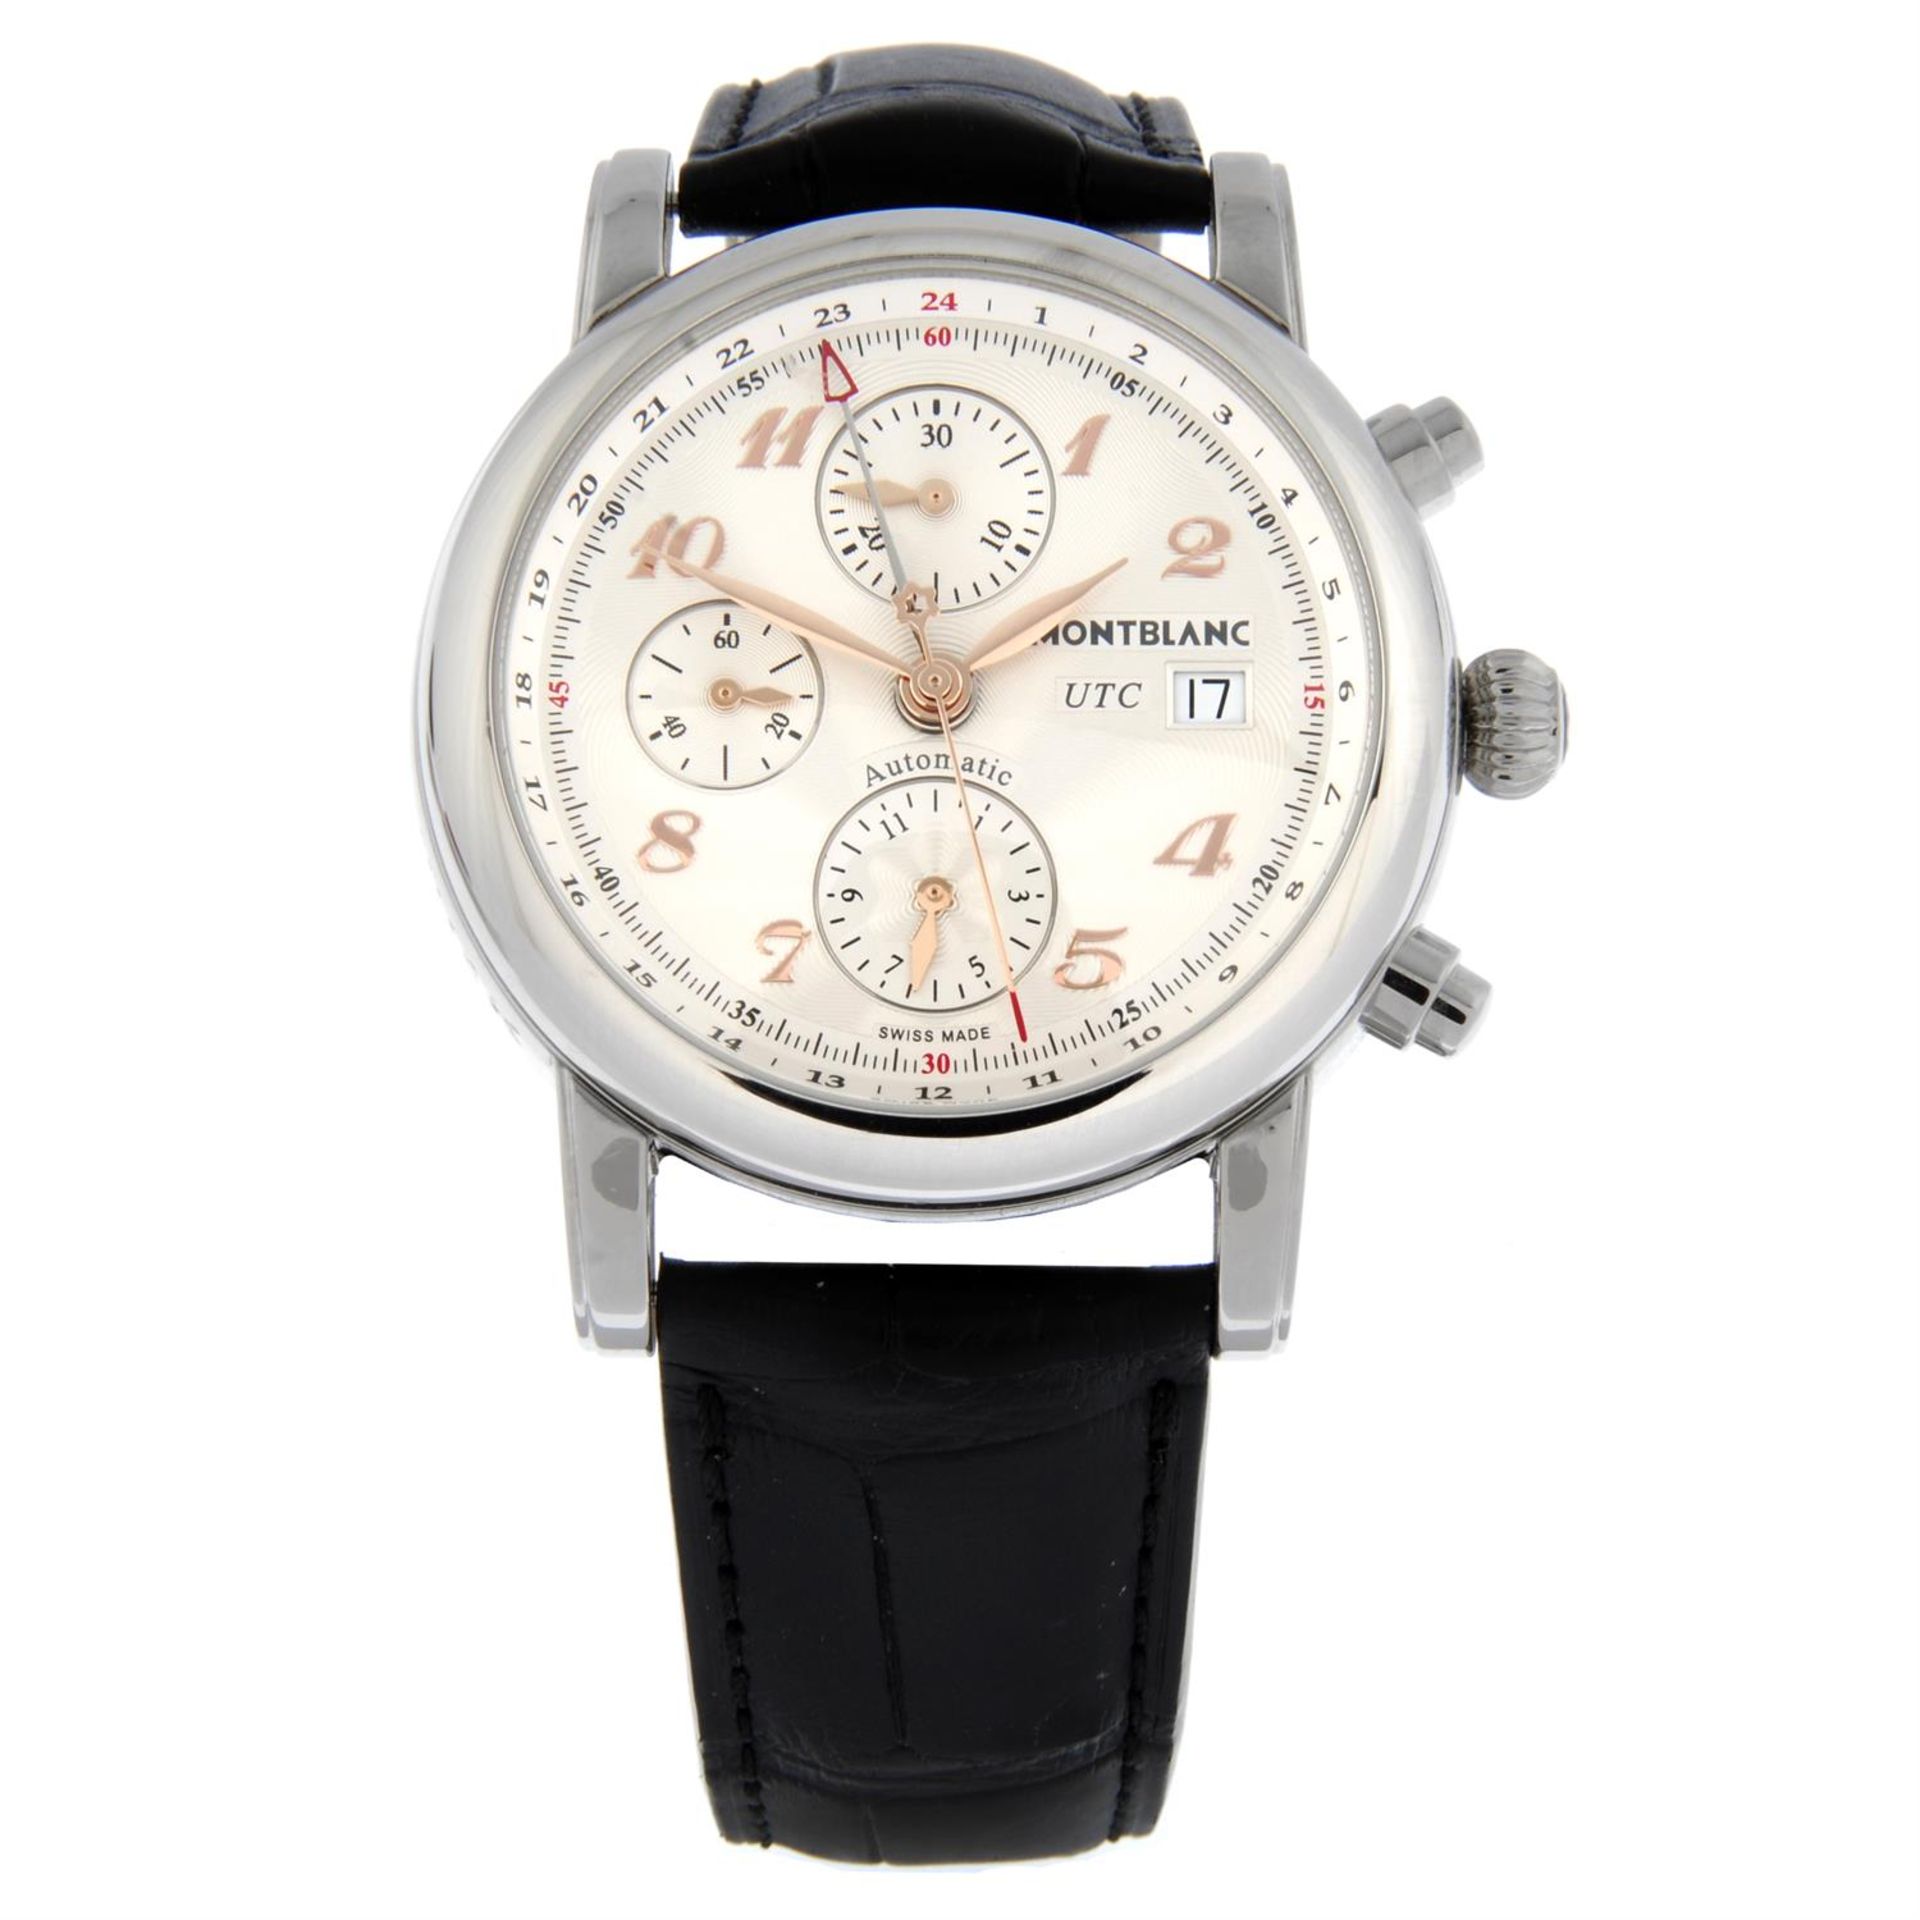 MONTBLANC - a stainless steel Star chronograph wrist watch, 42mm.